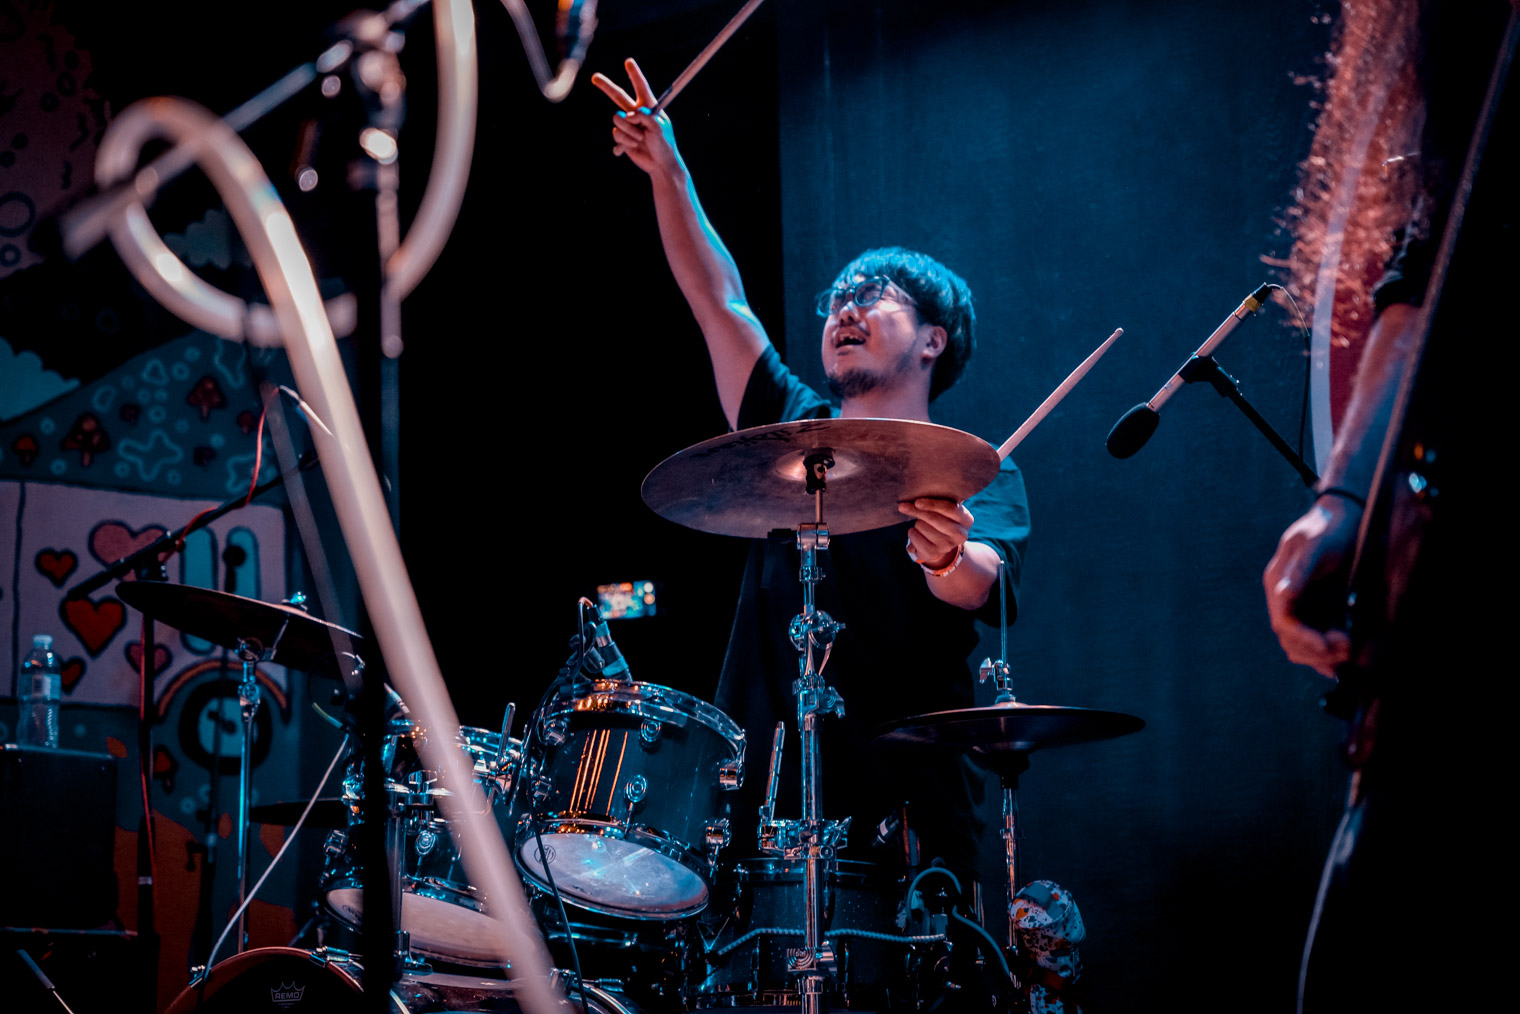 A drummer on stage 